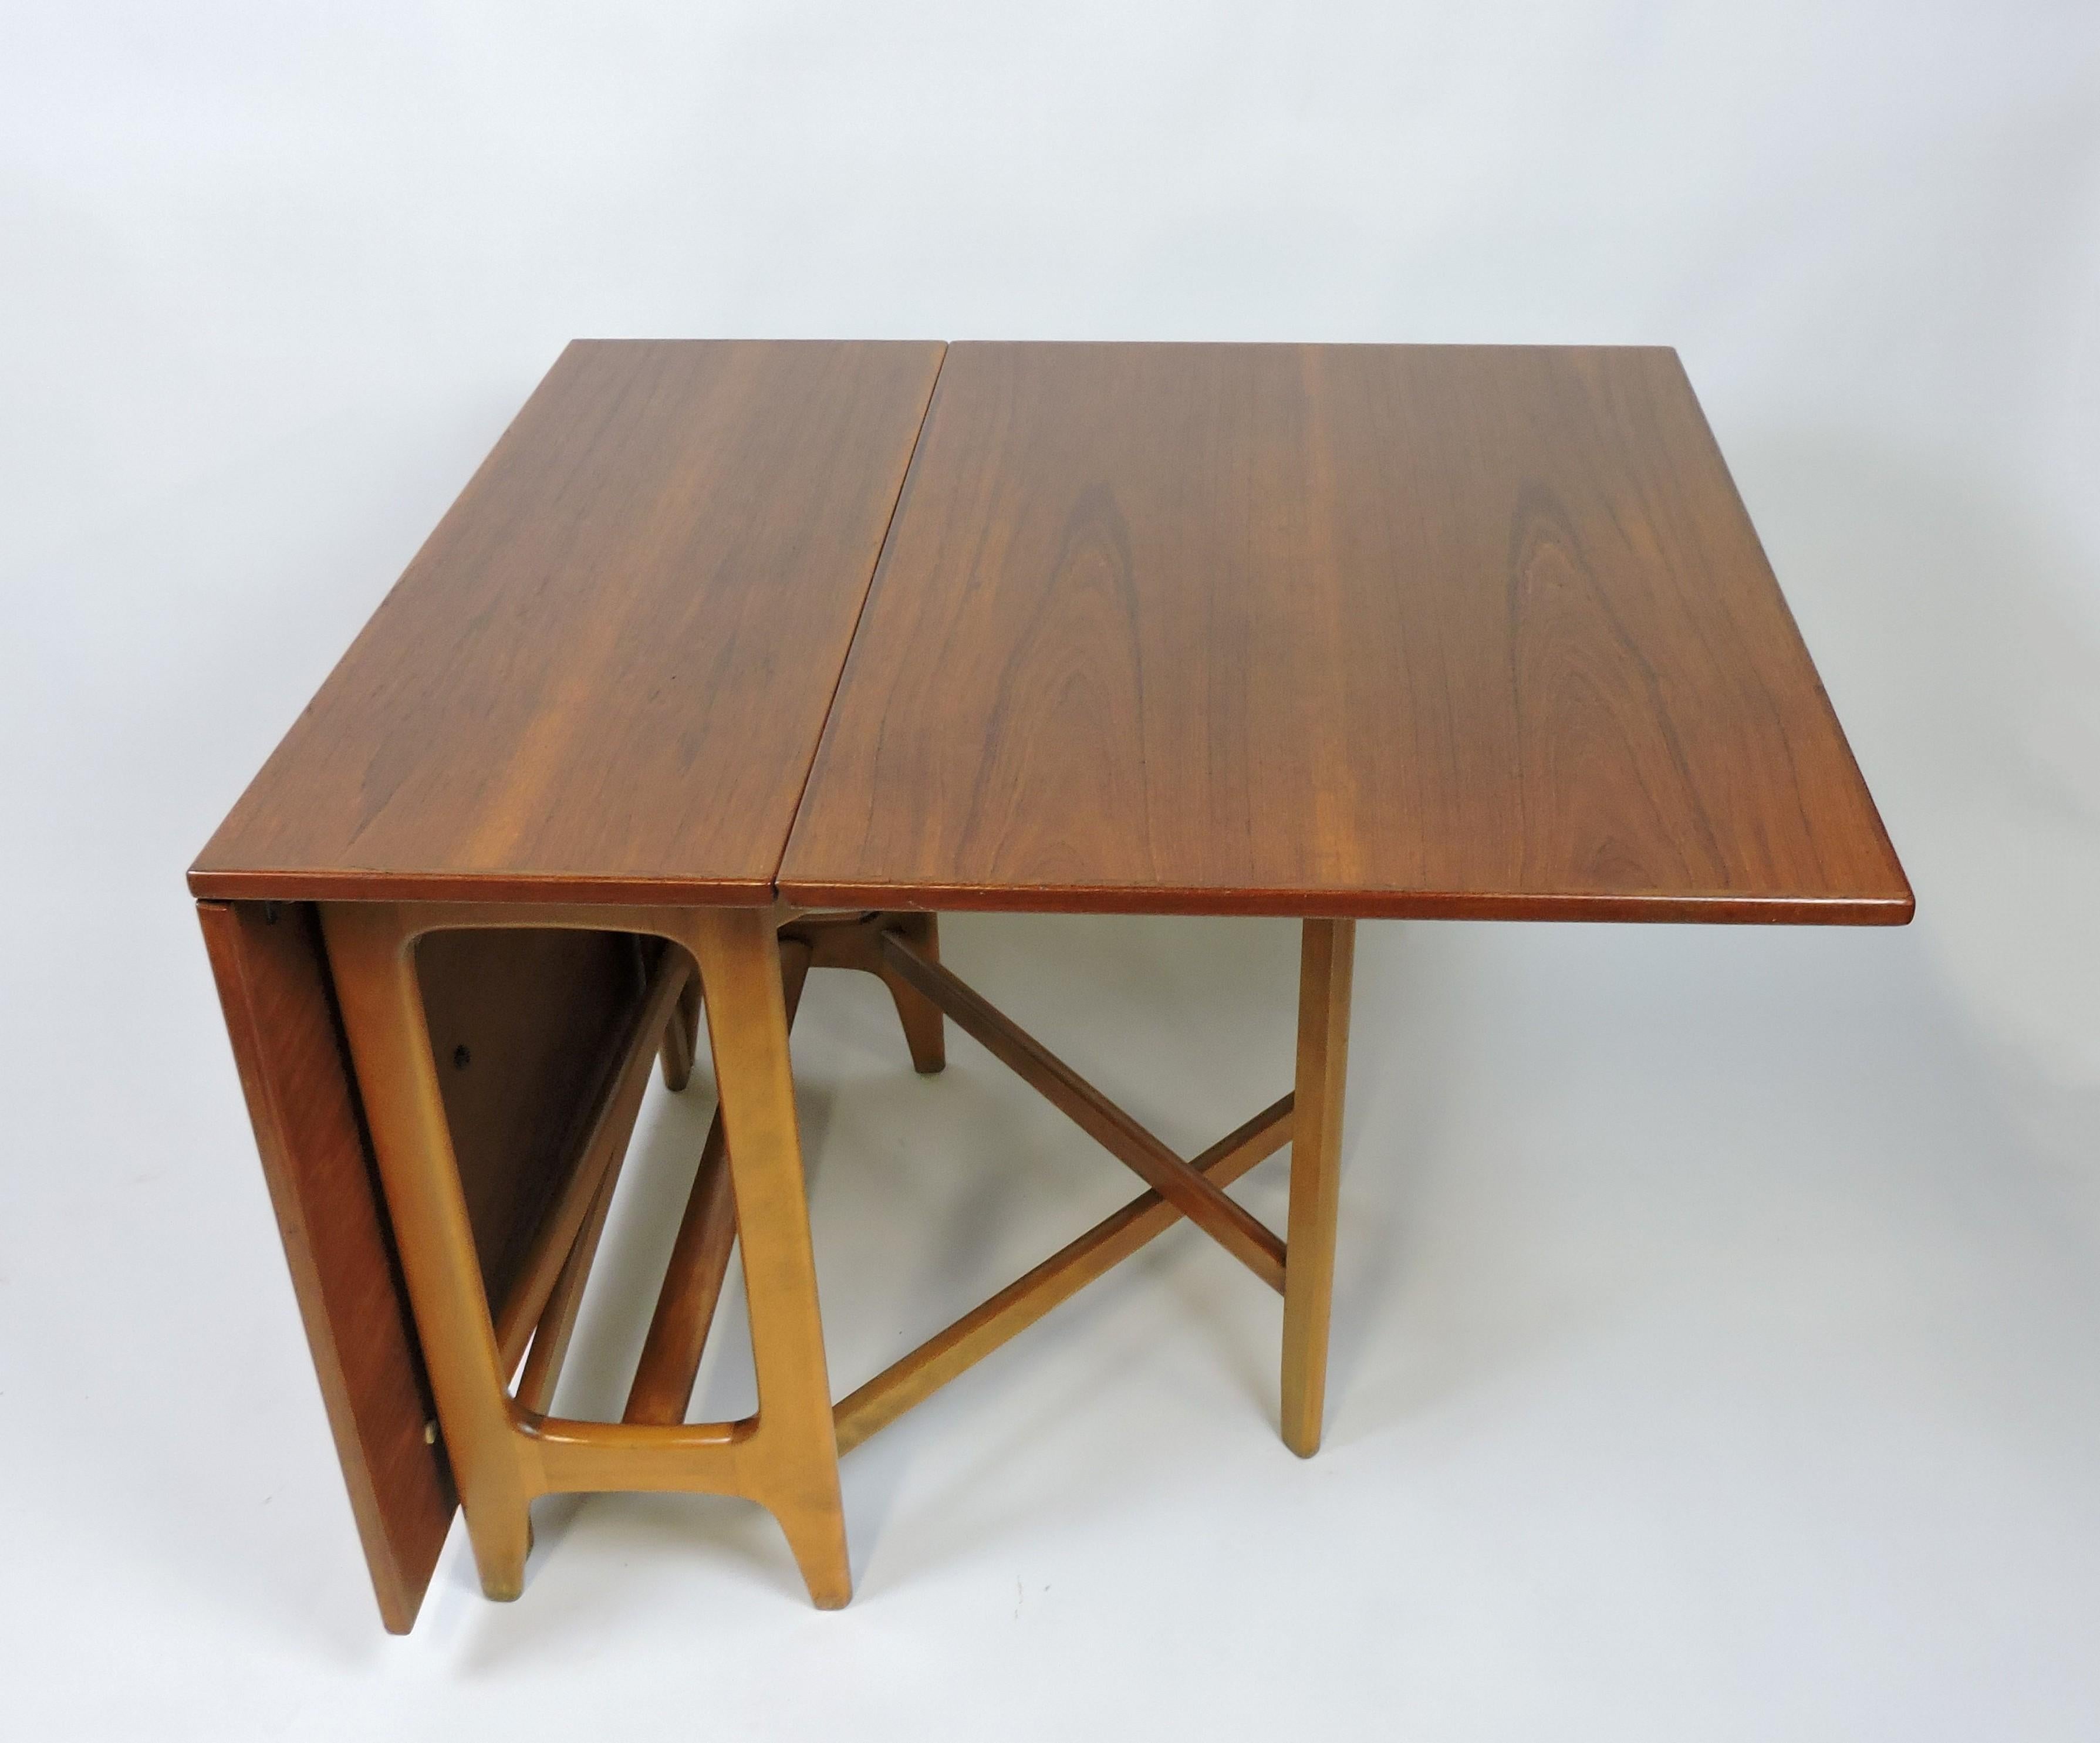 Beautiful Scandinavian modern teak drop leaf dining table designed by Bendt Winge and made in Norway. This table has sculpted solid beech legs and two drop down leaves that extend the surface area from 13.5 inches when closed to 64 inches when fully